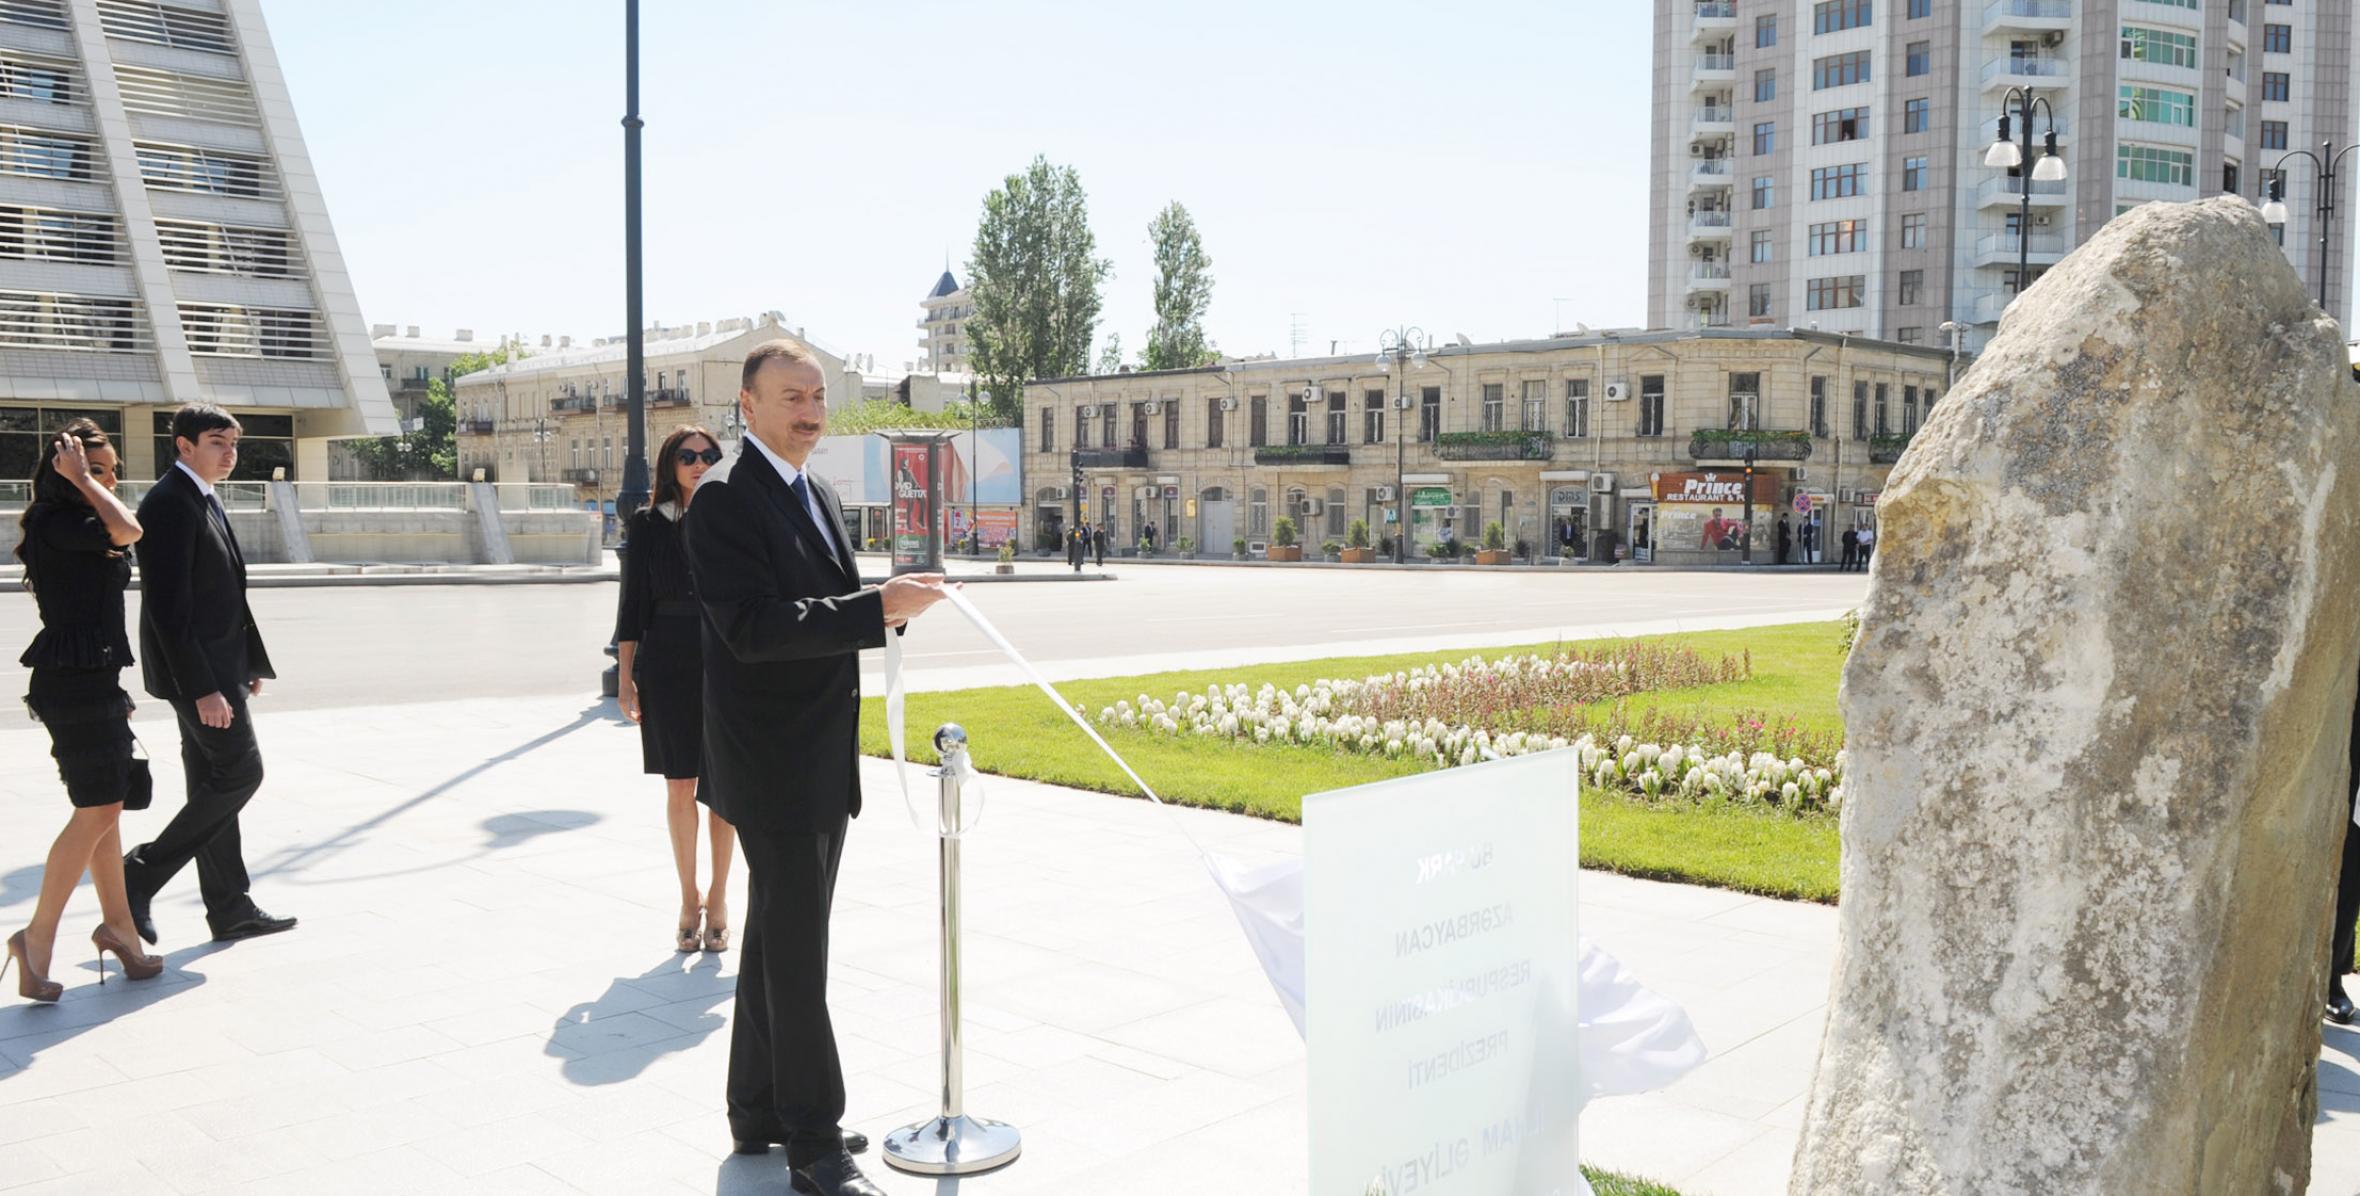 Ilham Aliyev attended the opening of a new park complex in Baku